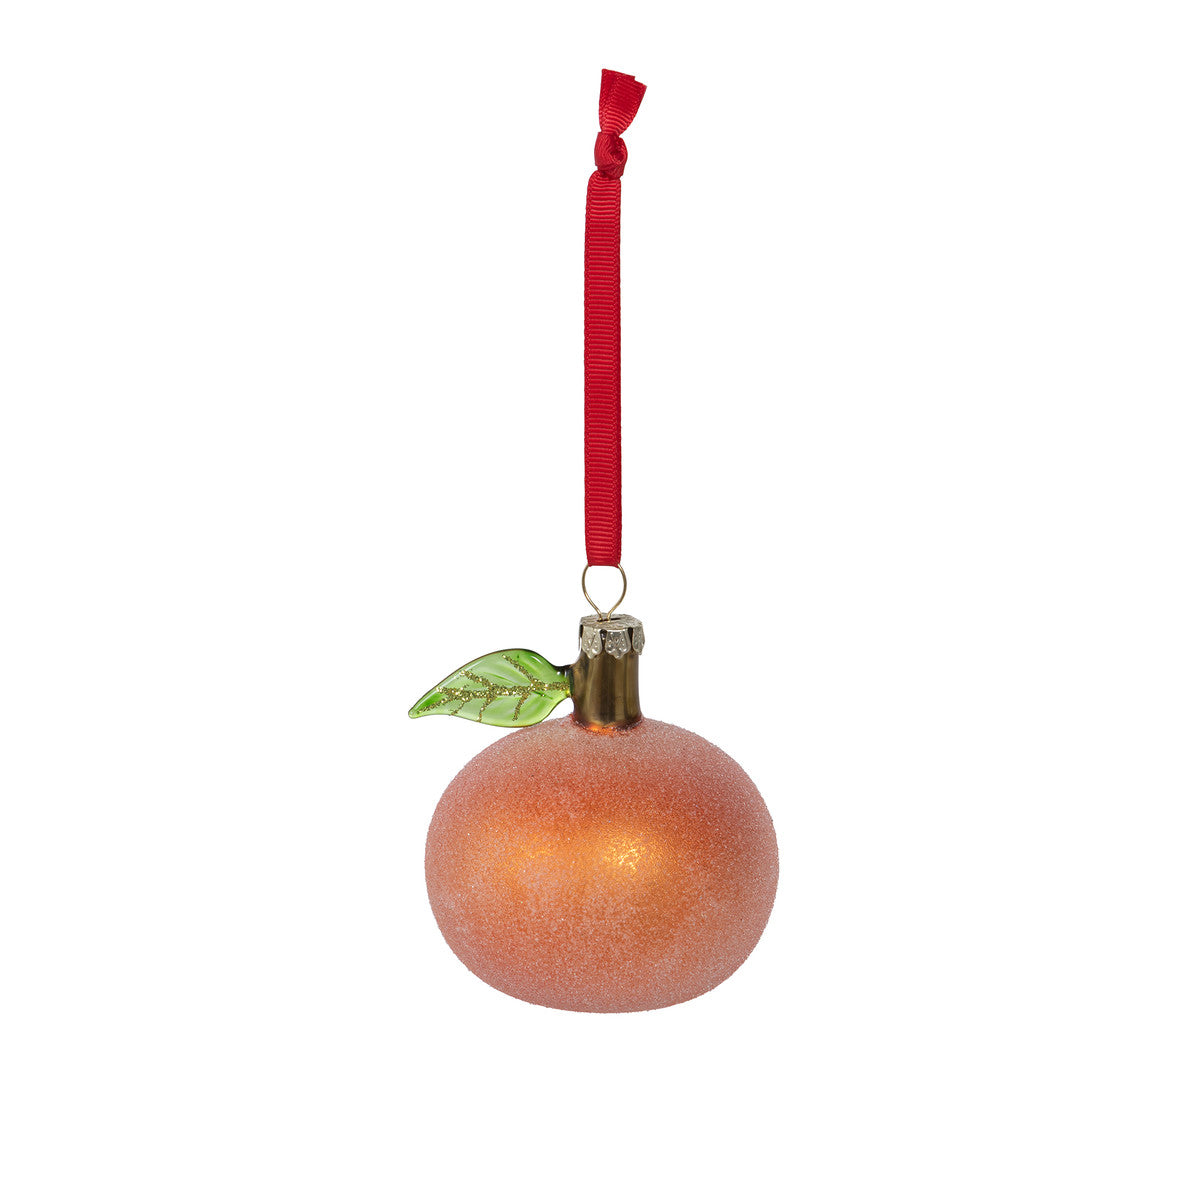 Glass Orange Apple Ornament Hanging From Red Ribbon